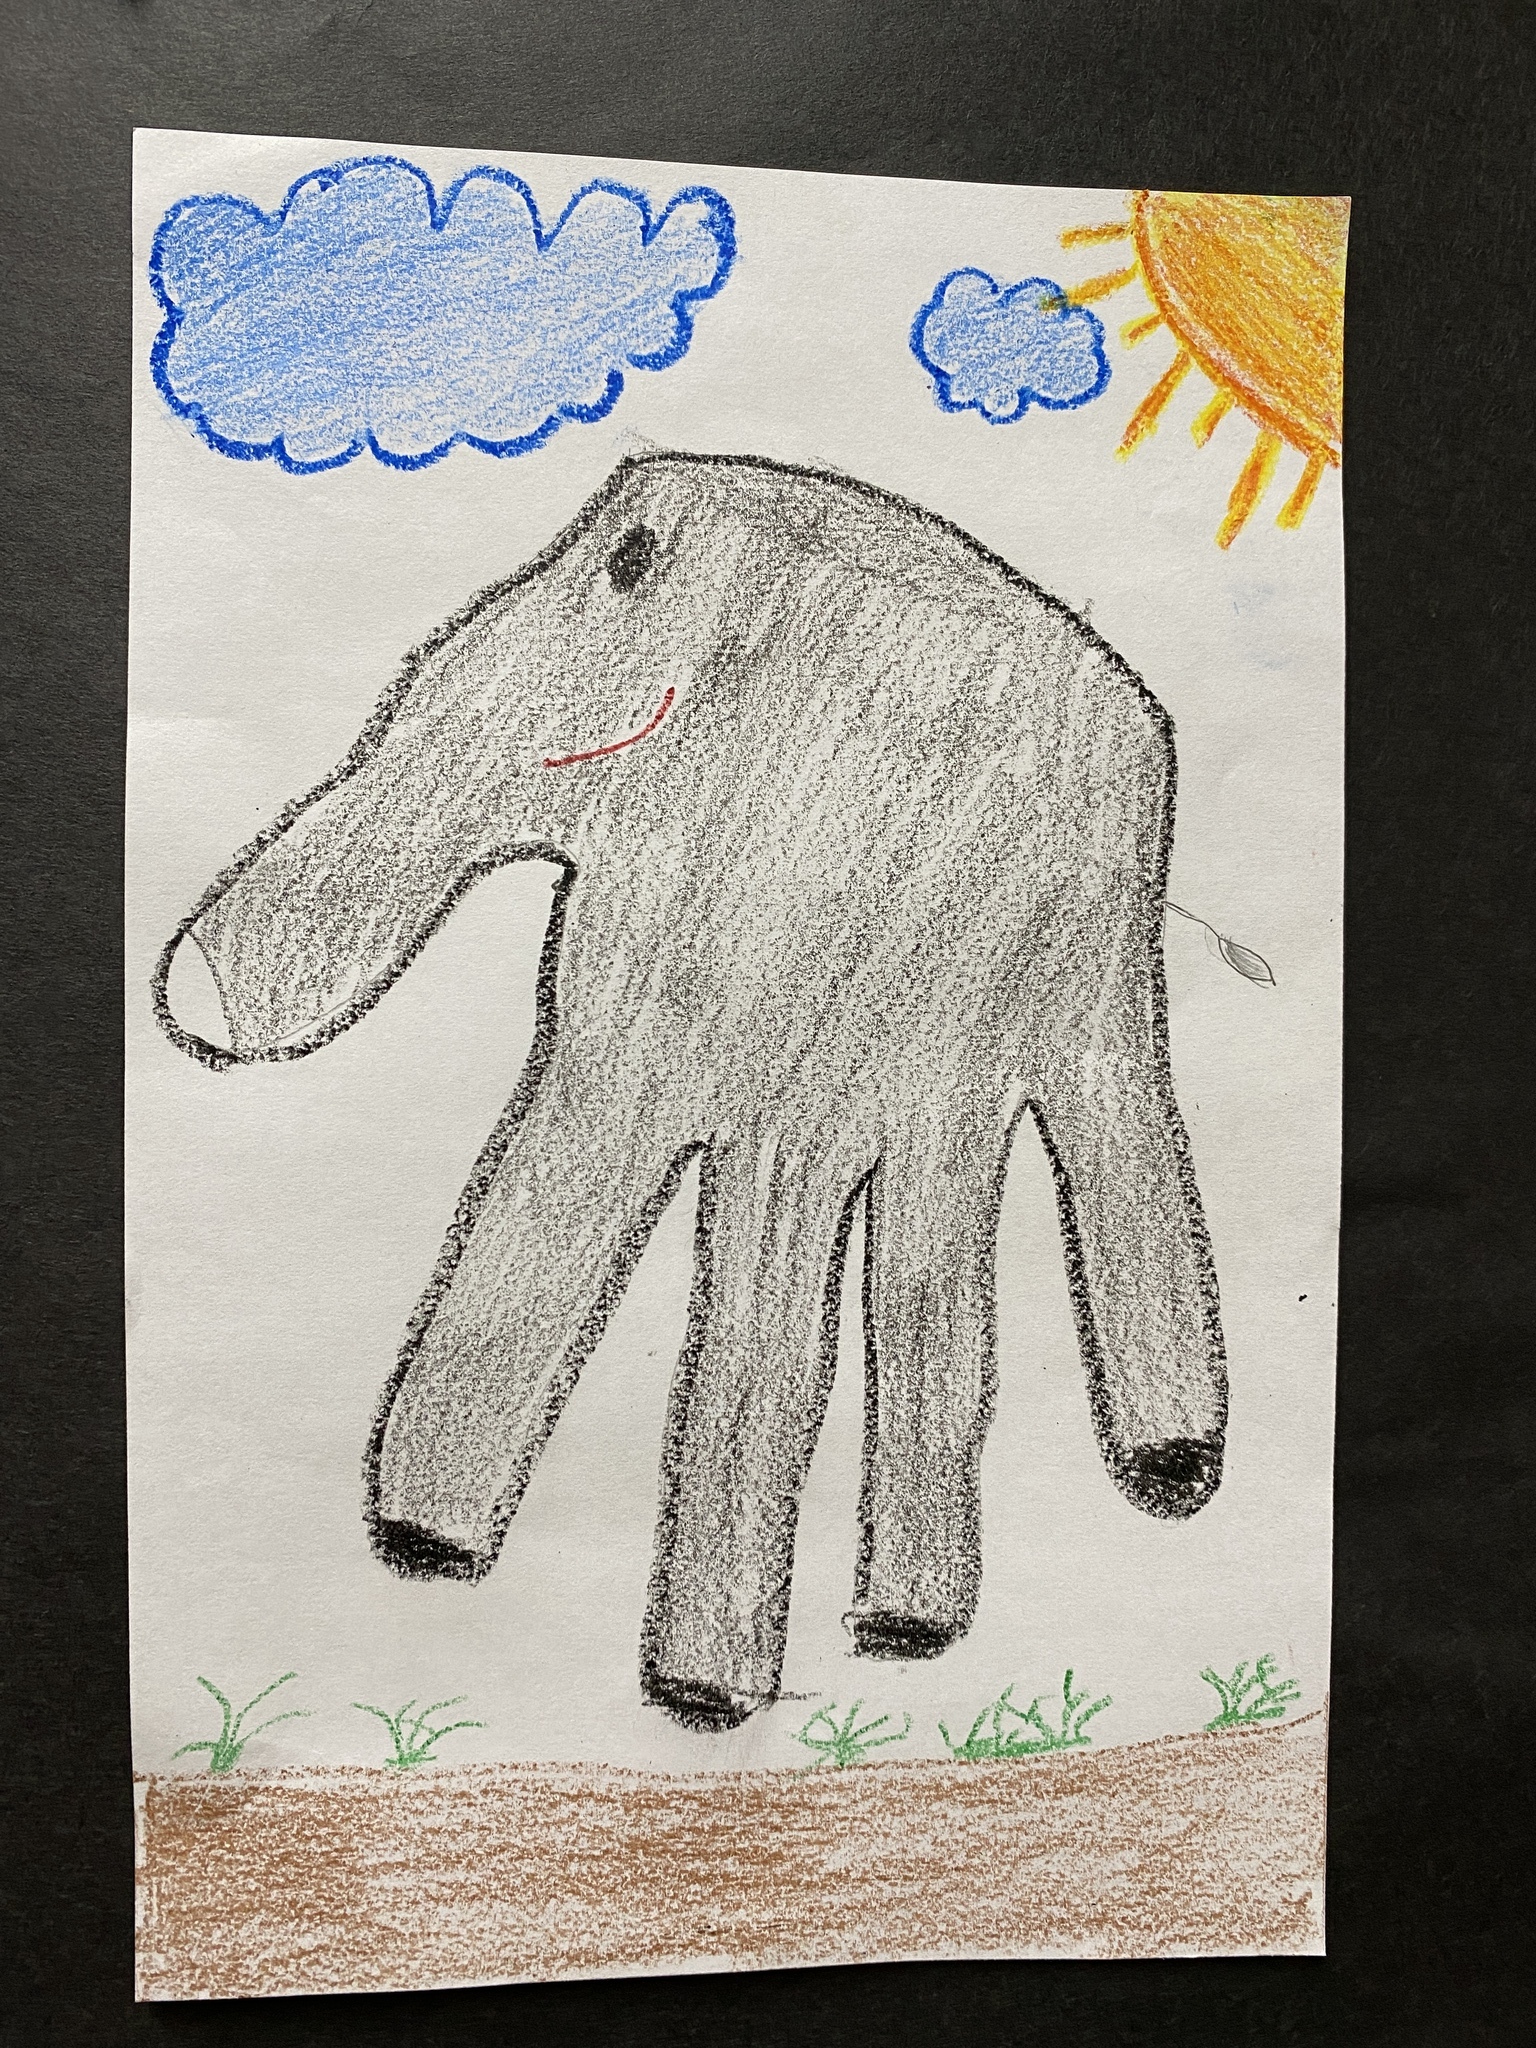 Hand tracing colored with crayon to look like an elephant